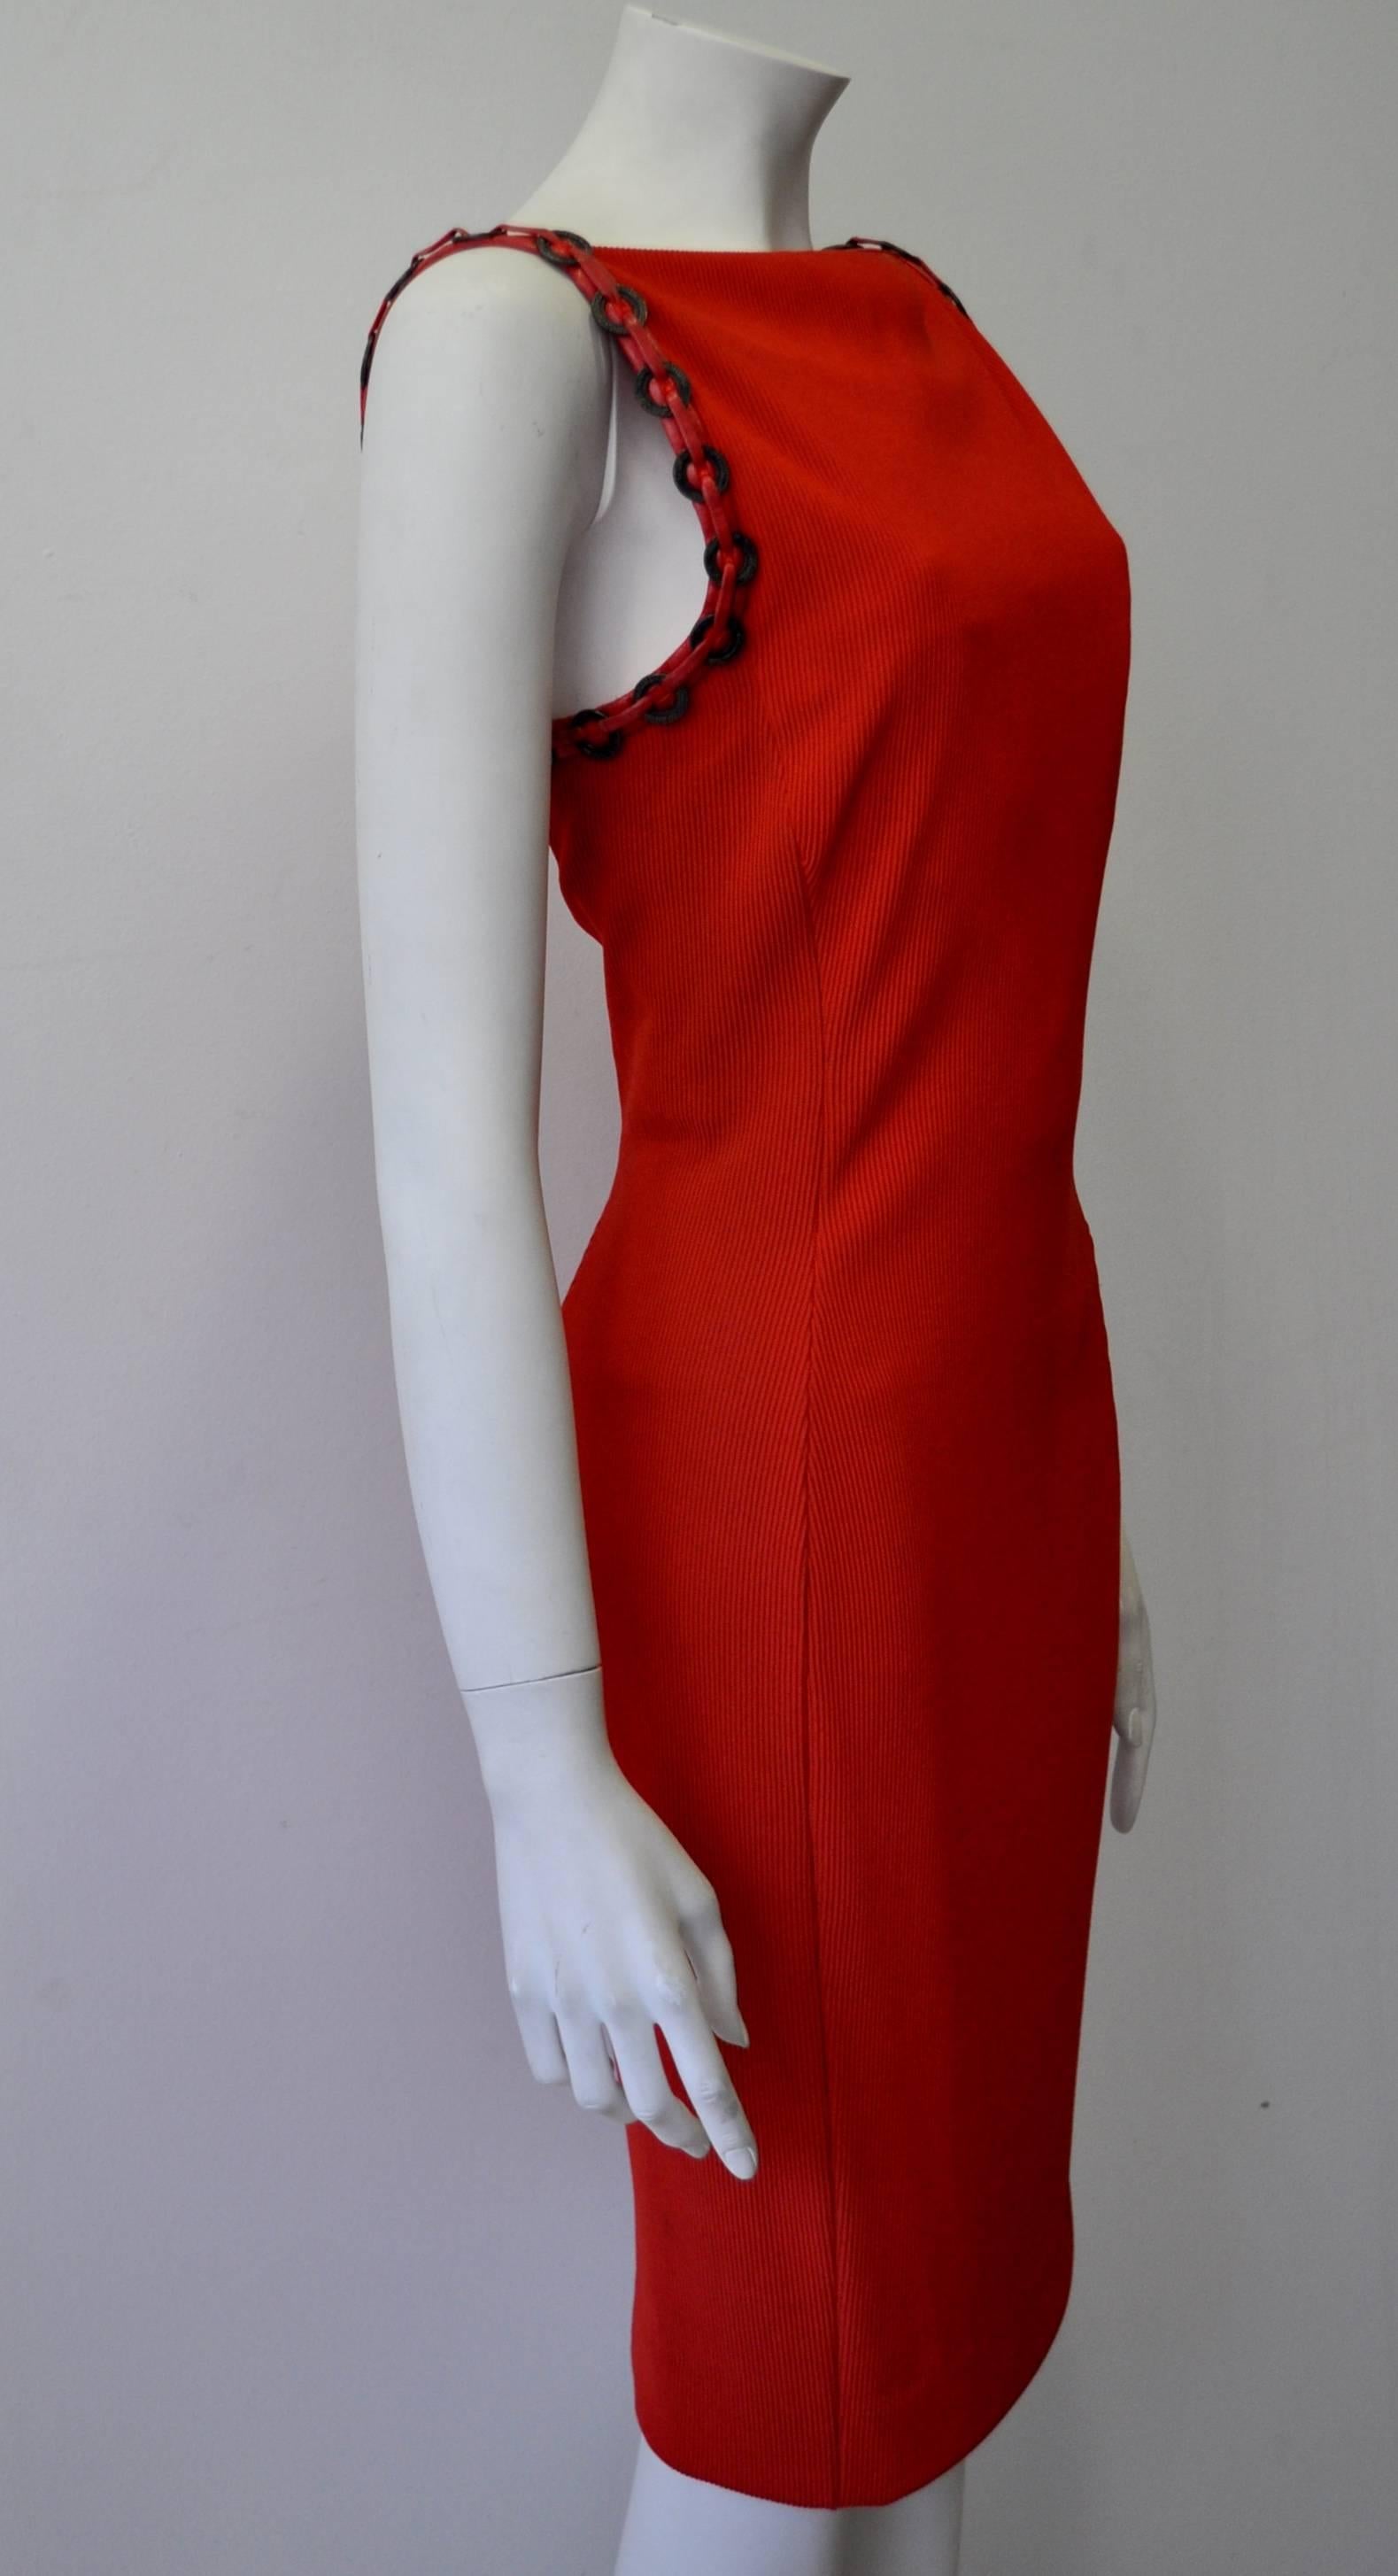 Iconic Gianni Versace Couture Red Siren Bodycon Dress In New Condition For Sale In Athens, Agia Paraskevi